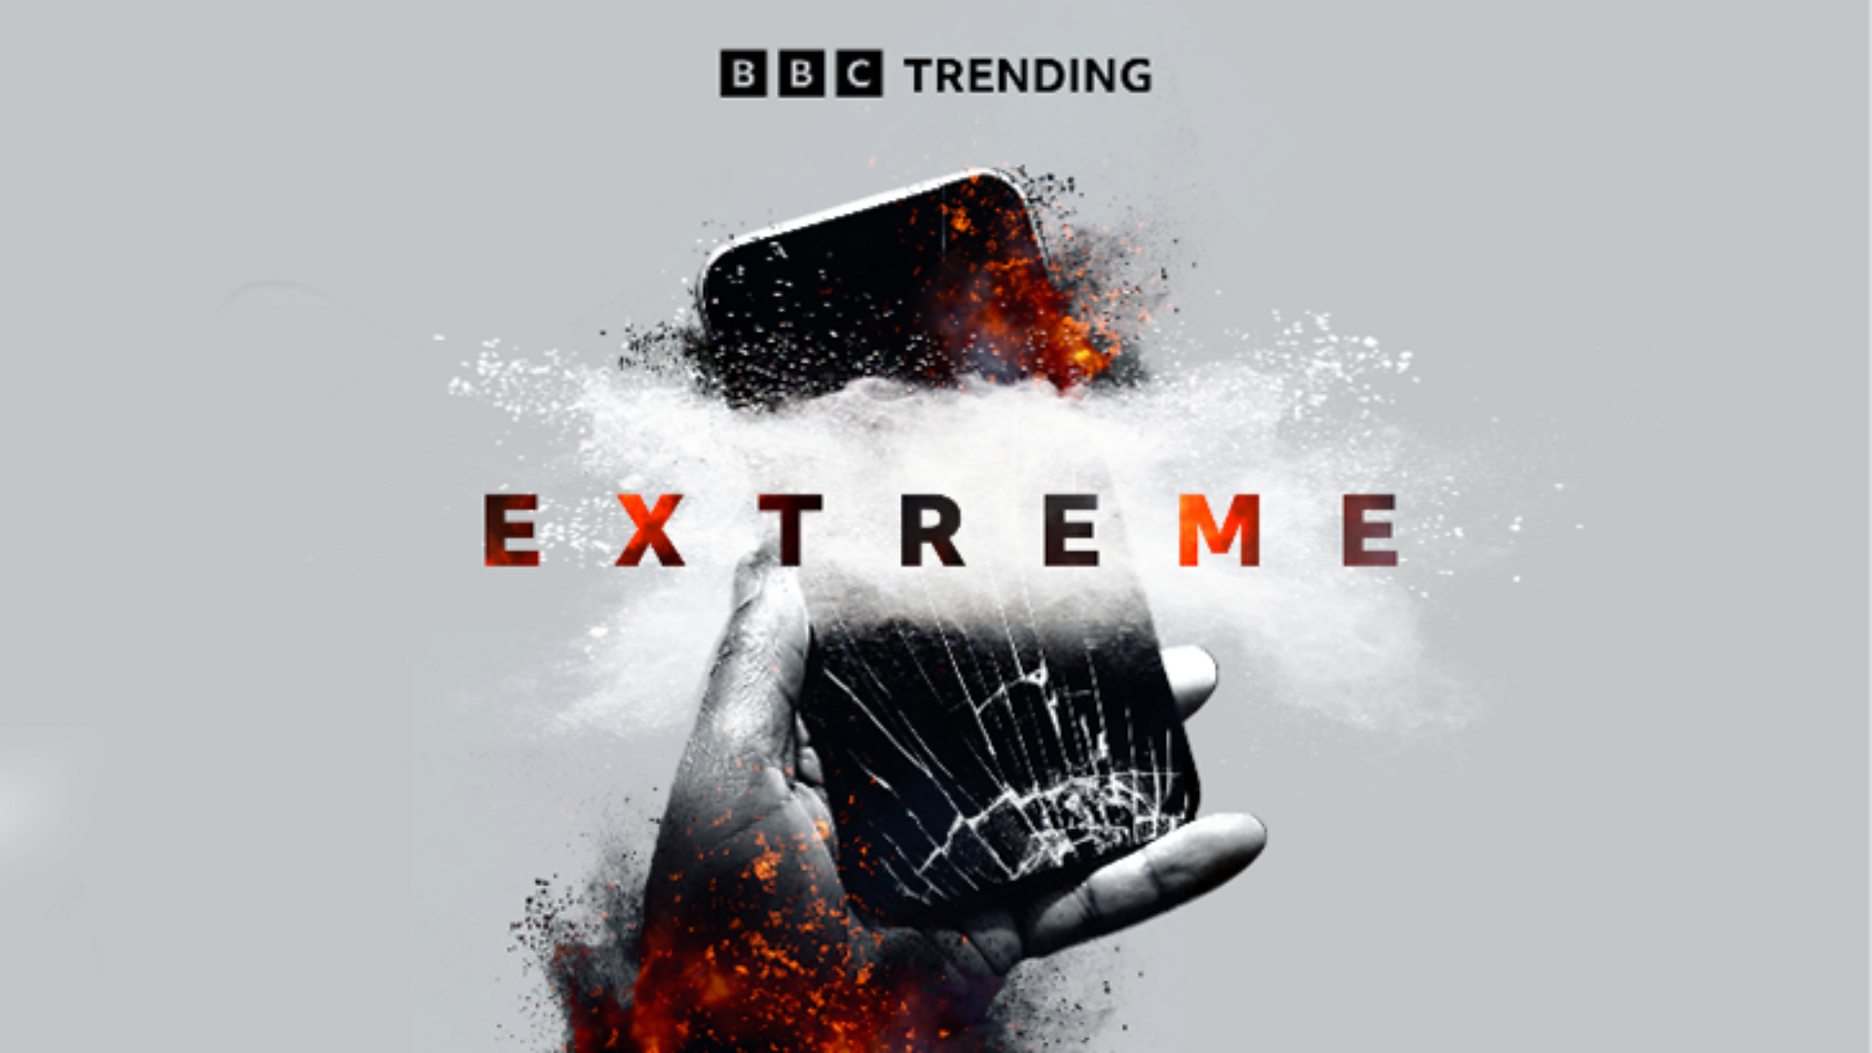 BBC Trending delves into the extremes of social media